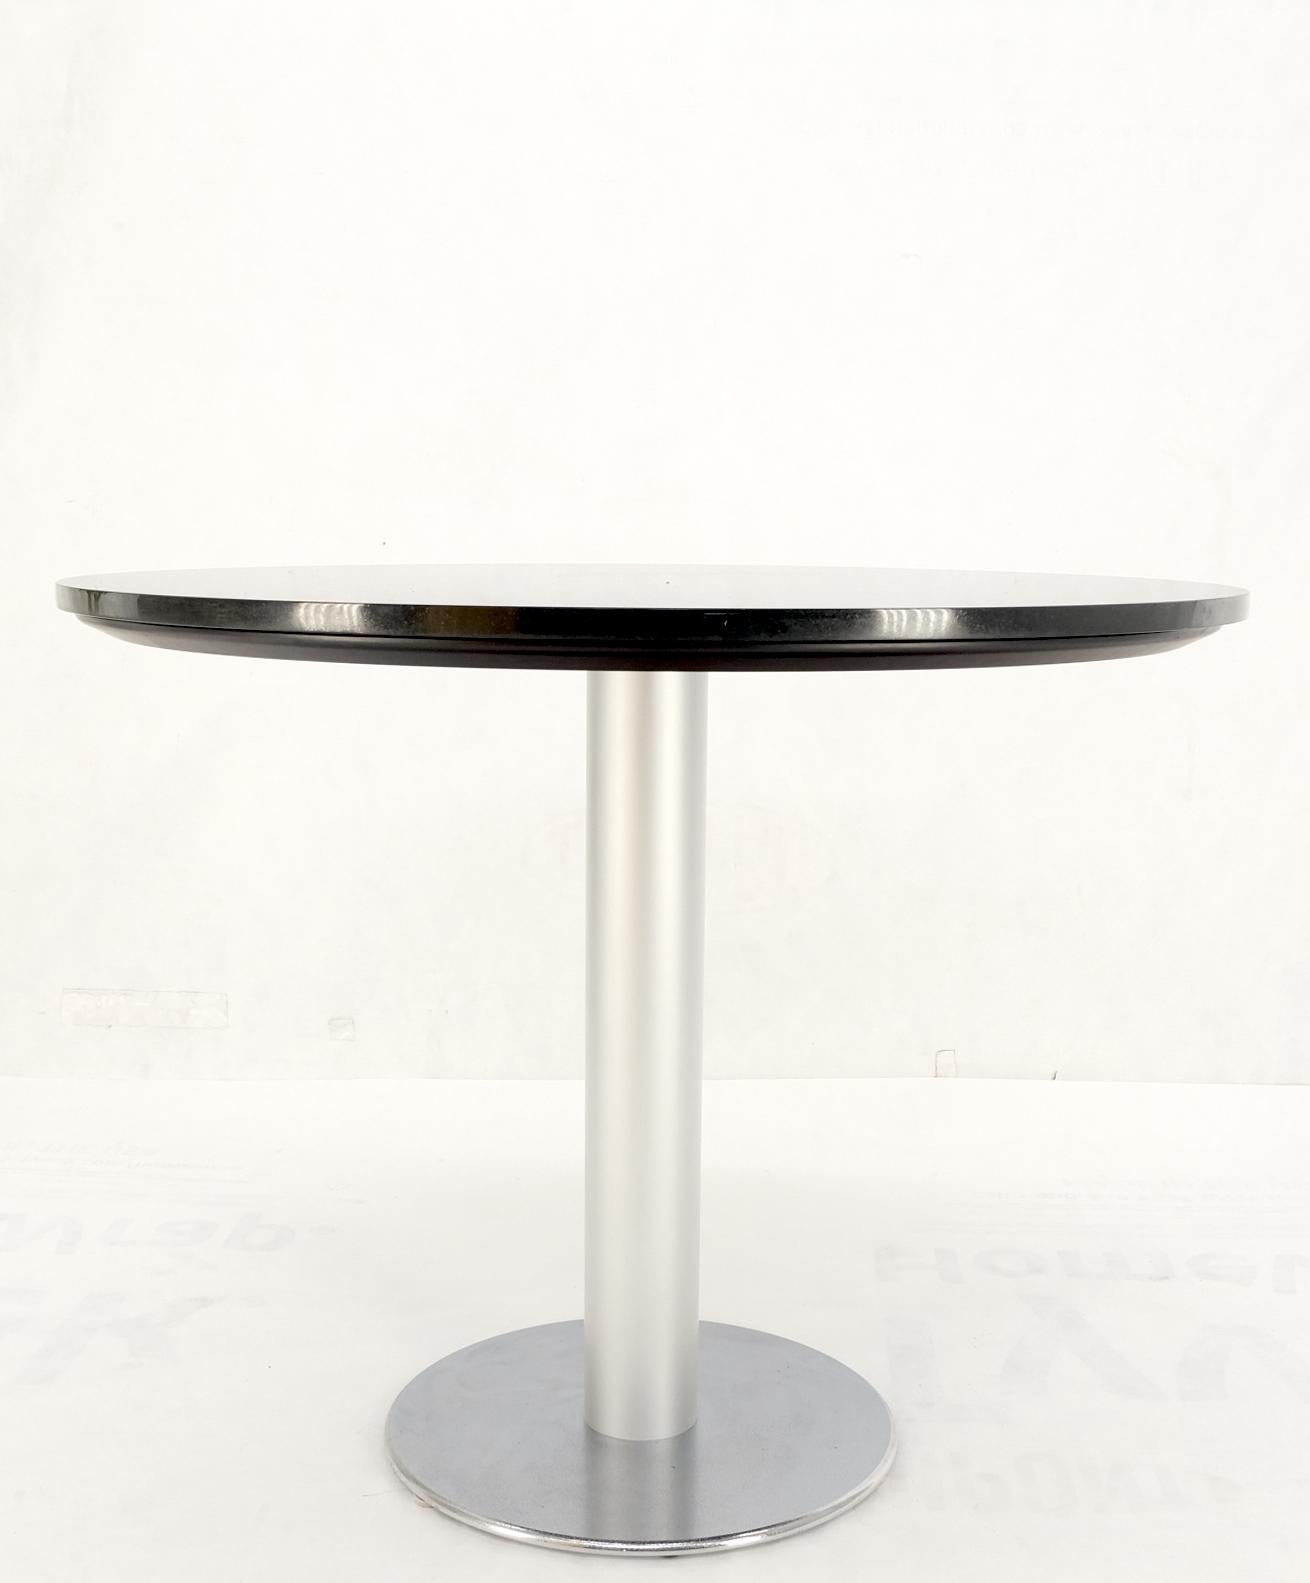 Black Granite Top Crome Pedestal Base Round Dining Table Mid Century Modern MINT For Sale 3